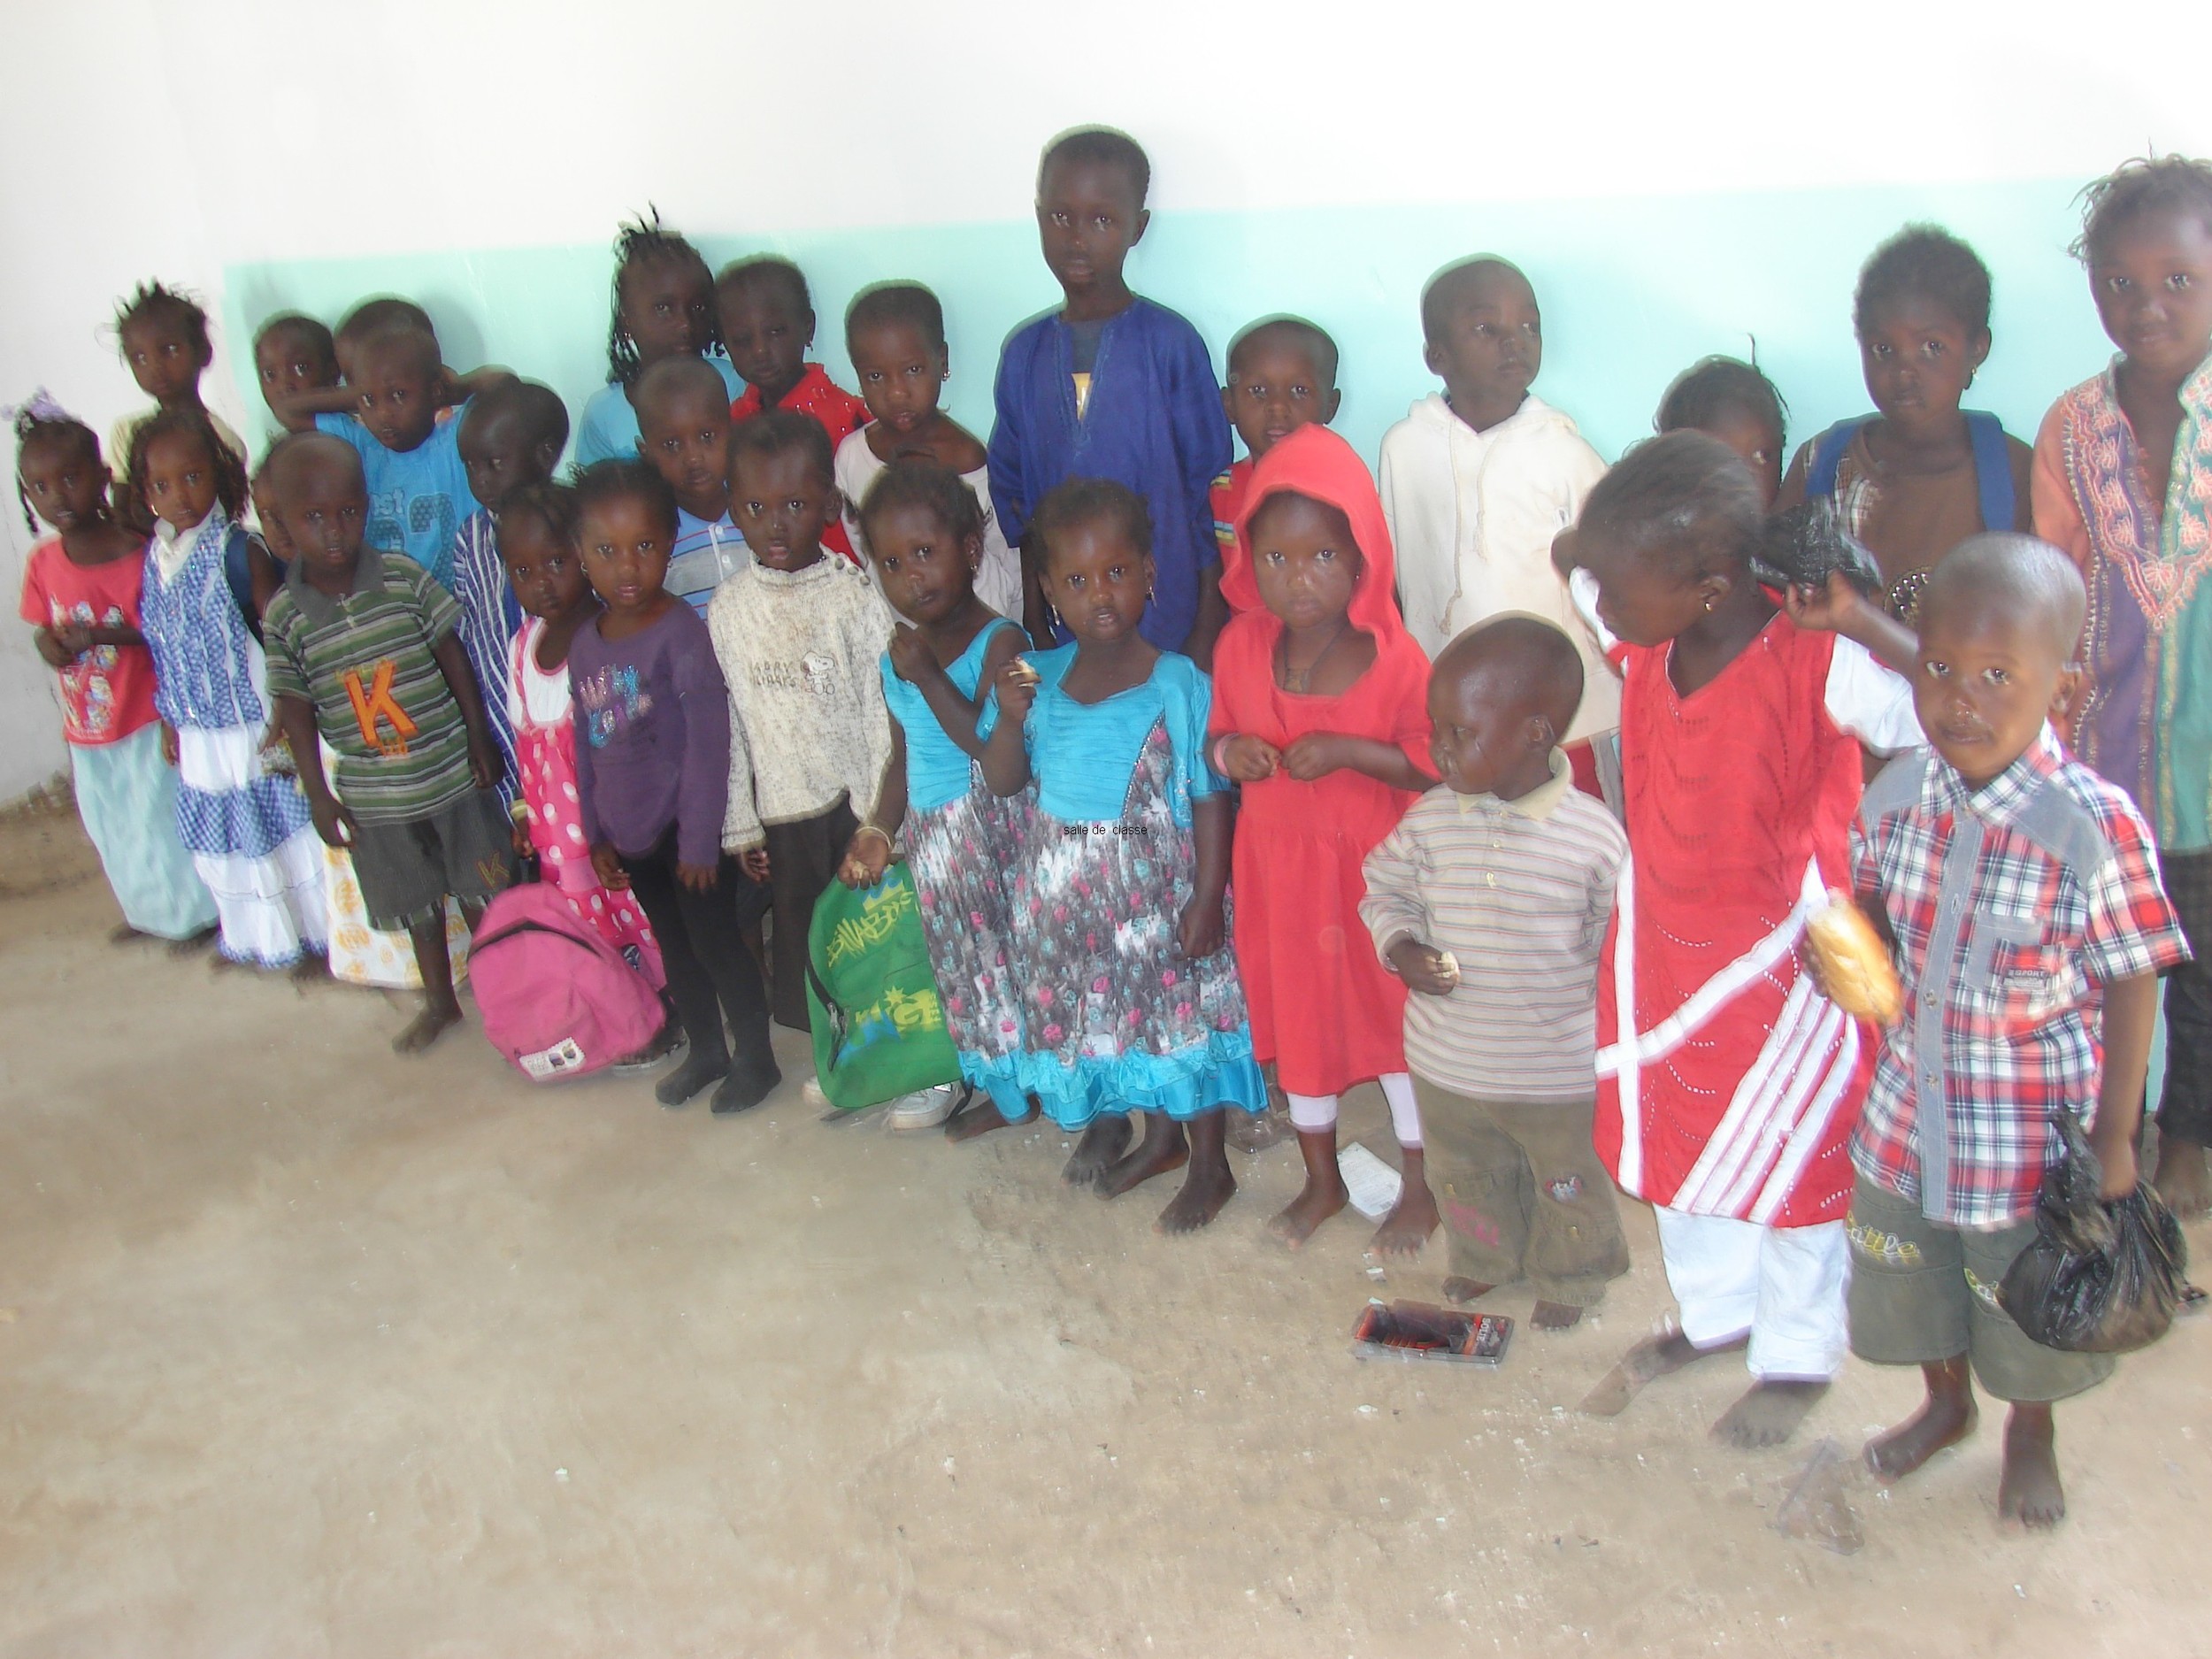  We also spent $400 to fix the floor of the pre-school to ensure a safe learning environment for all the kids. 